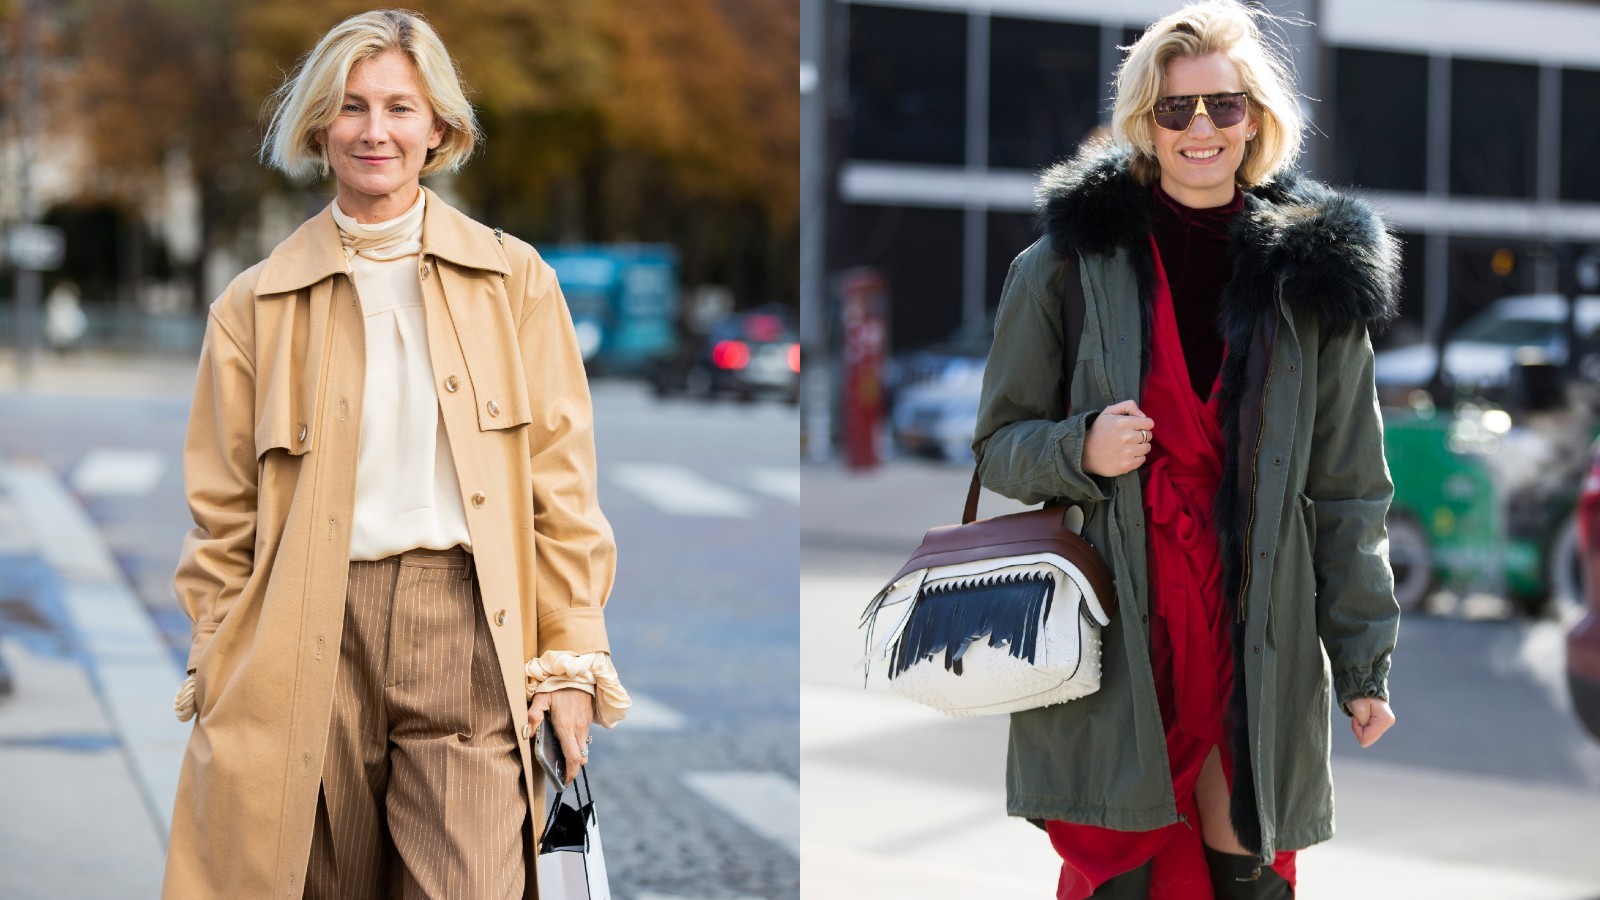 compressie Graan Megalopolis The trench coat vs parka coat: Which one is best? | Woman & Home